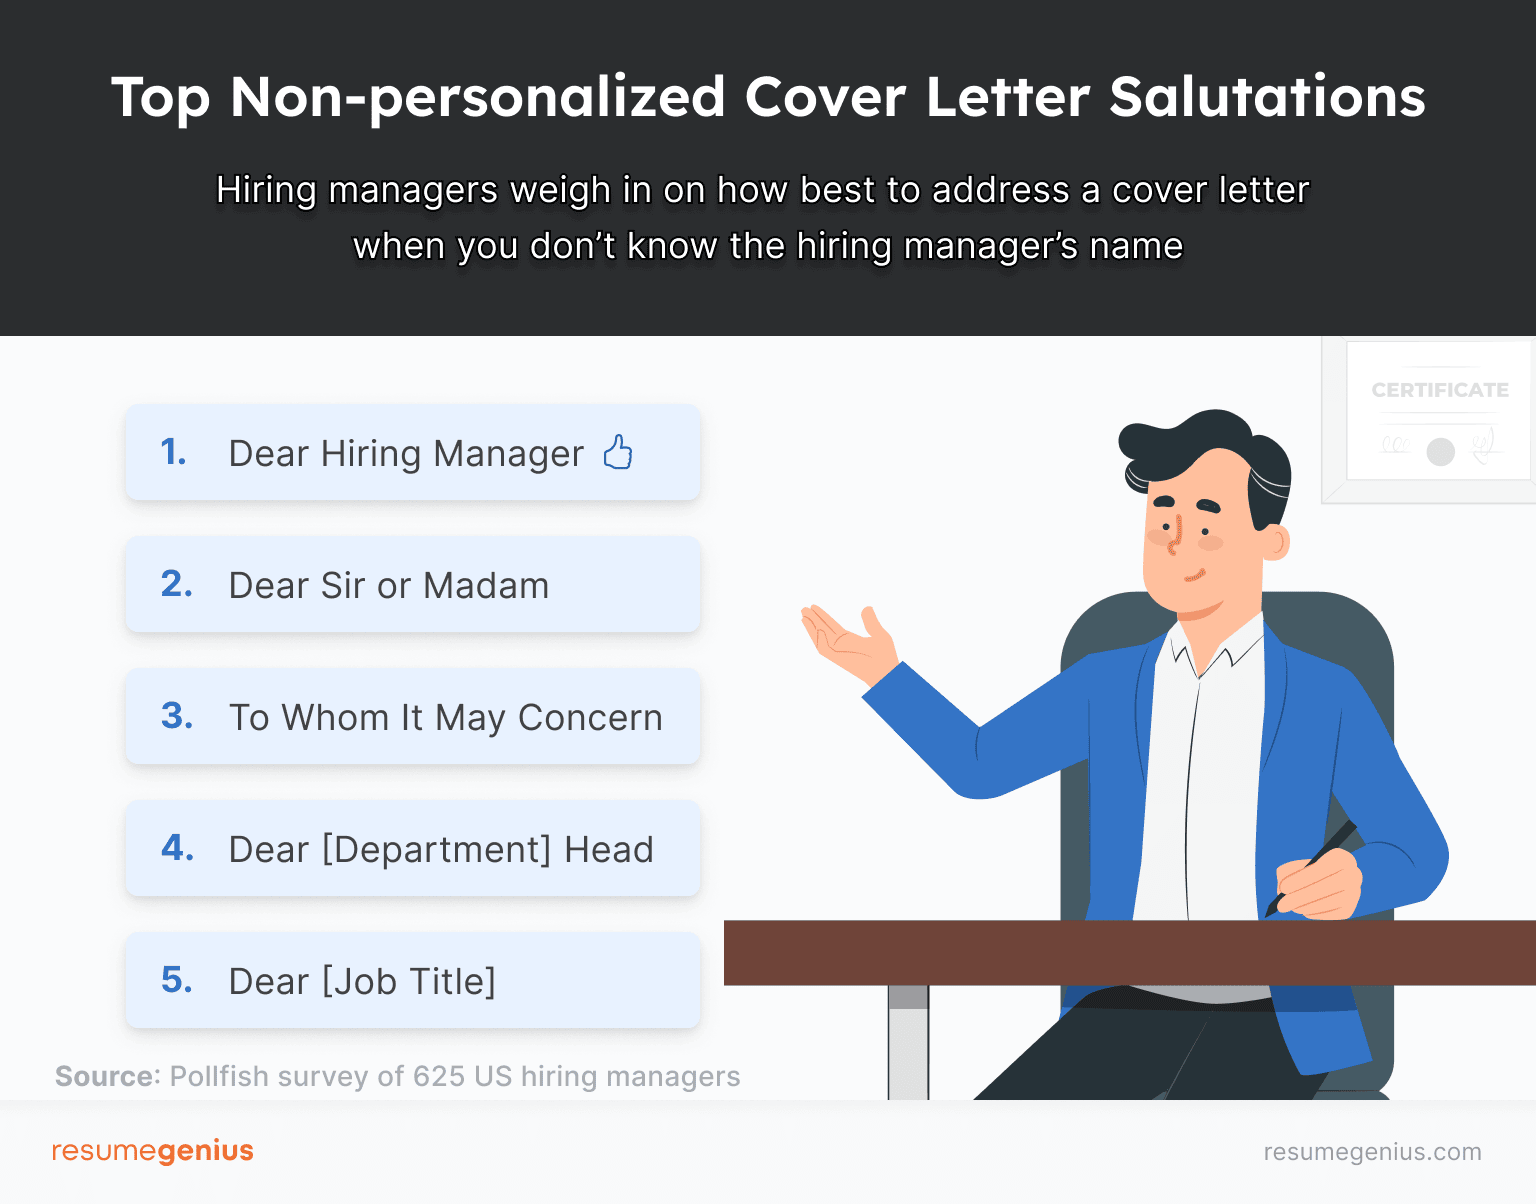 The top cover letter salutations to use when you don't know the hiring manager's name according to a Resume Genius survey of hiring managers